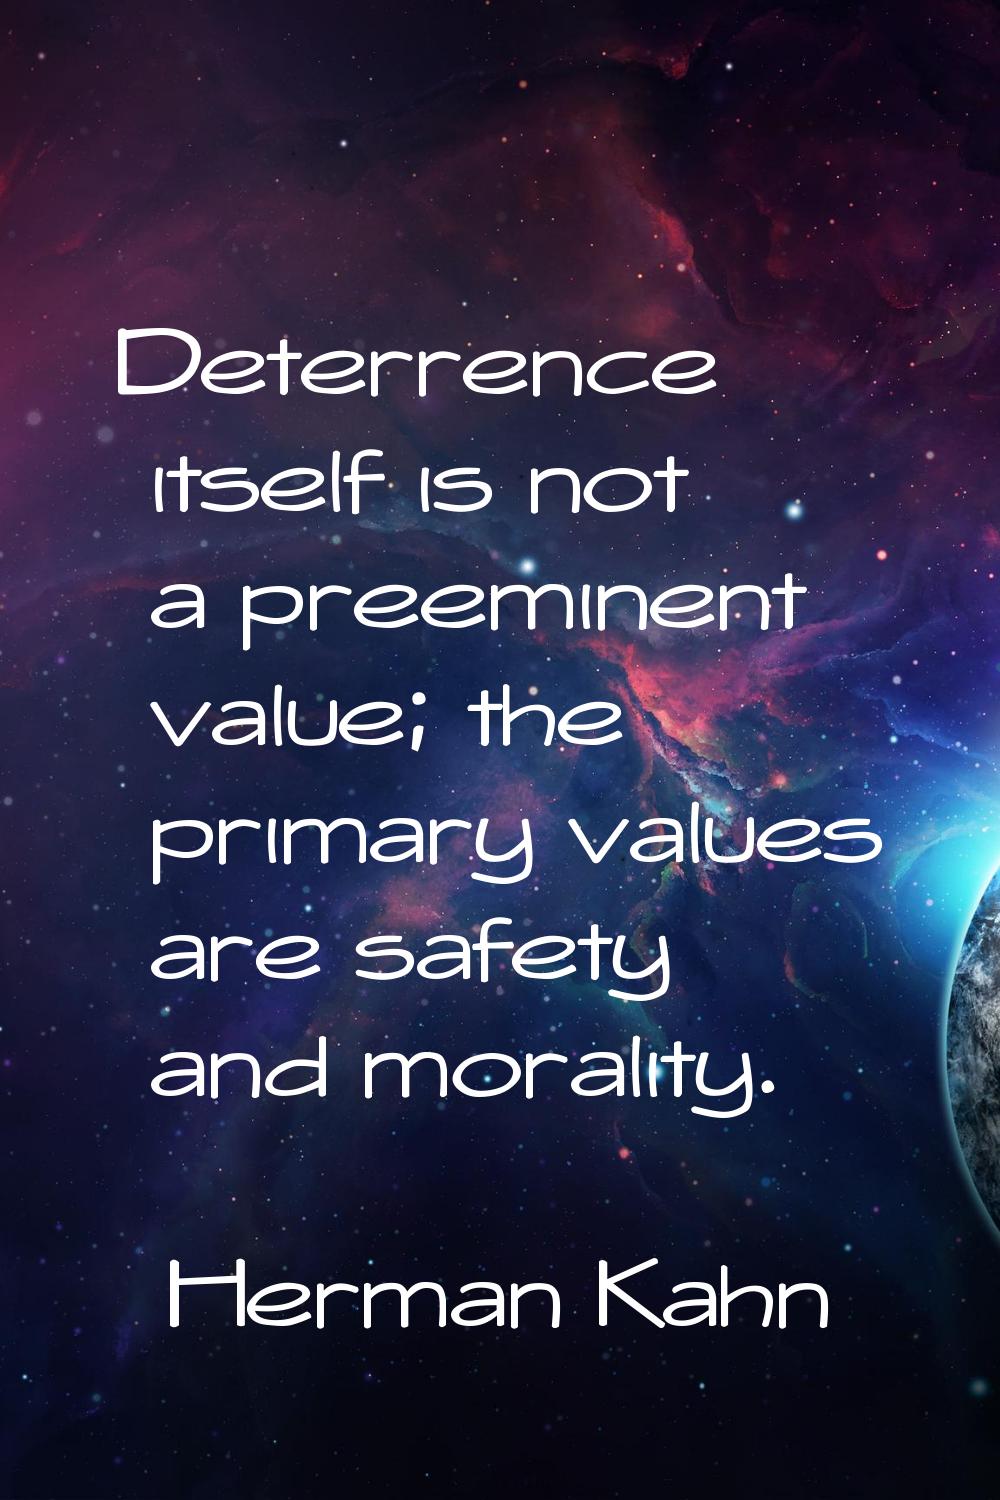 Deterrence itself is not a preeminent value; the primary values are safety and morality.